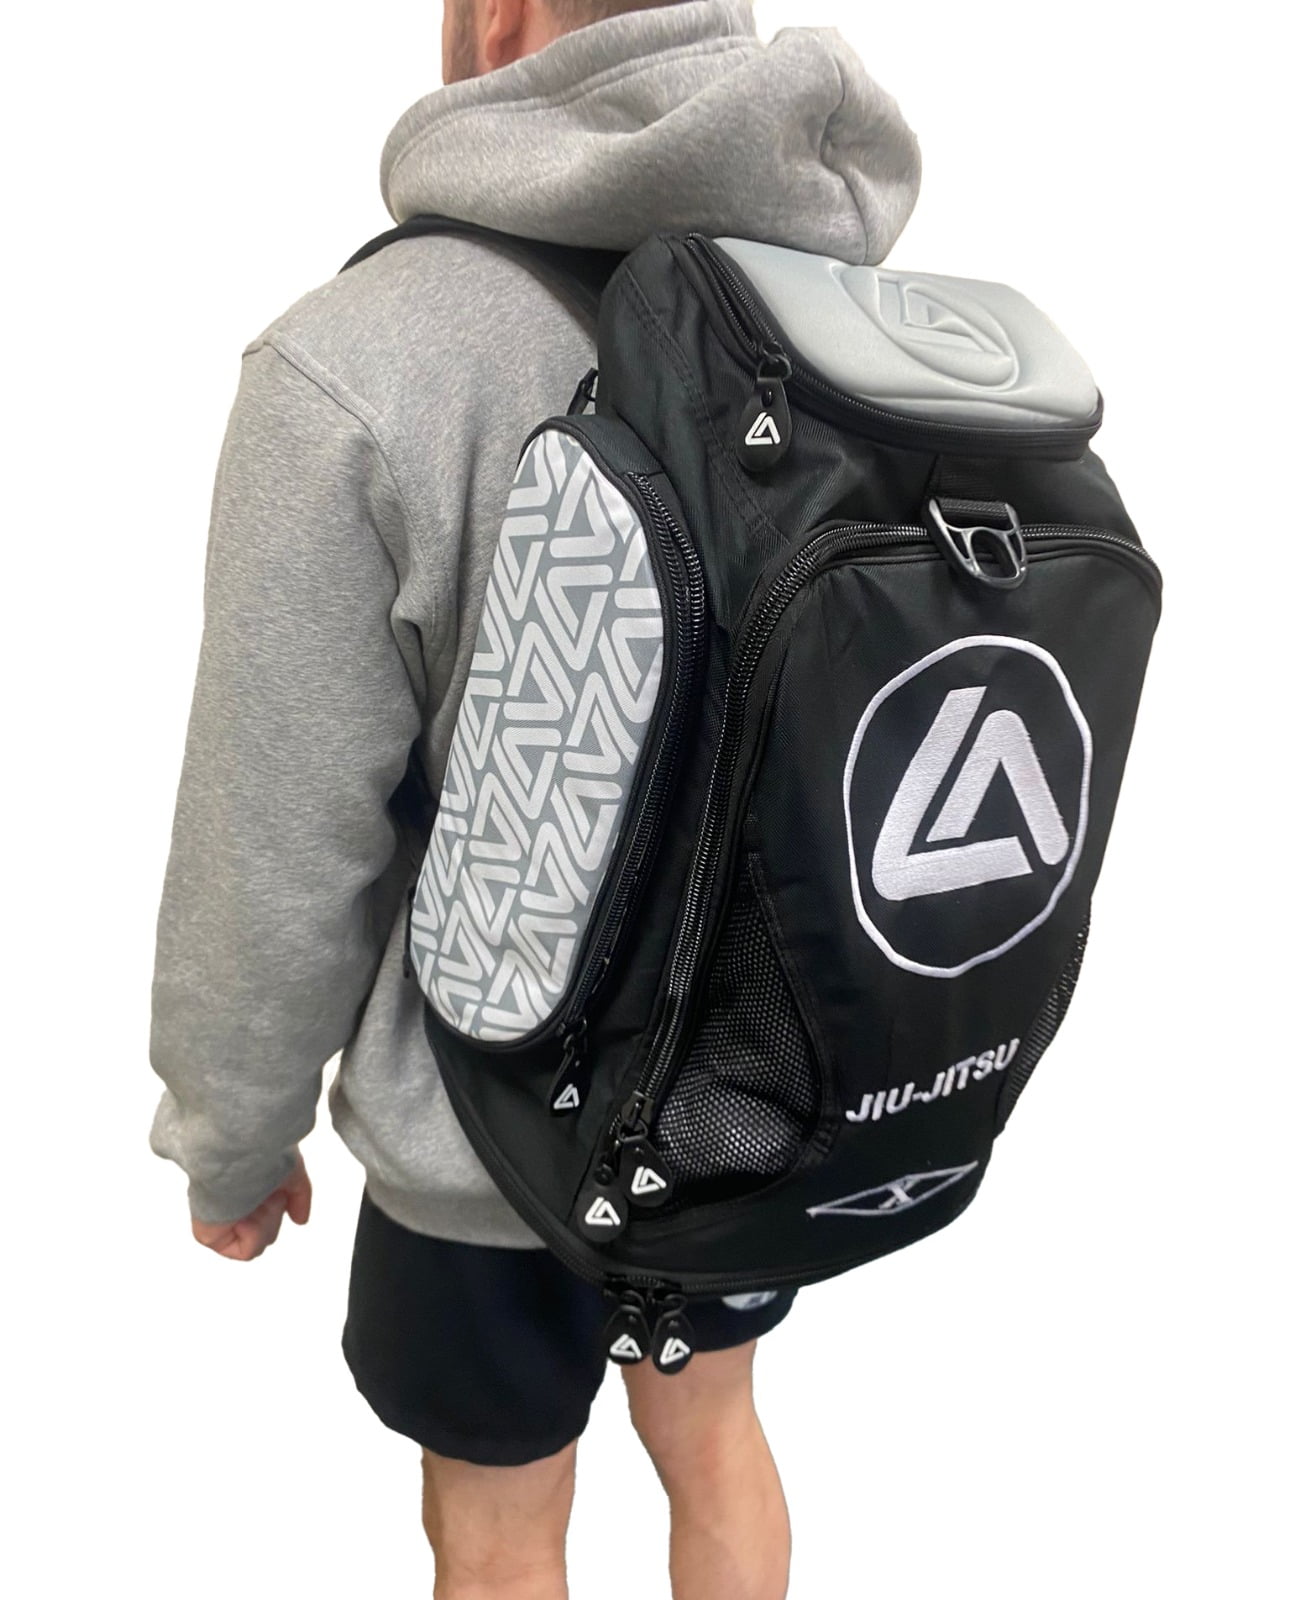 the side-rear view of a roger gracie branded backpack